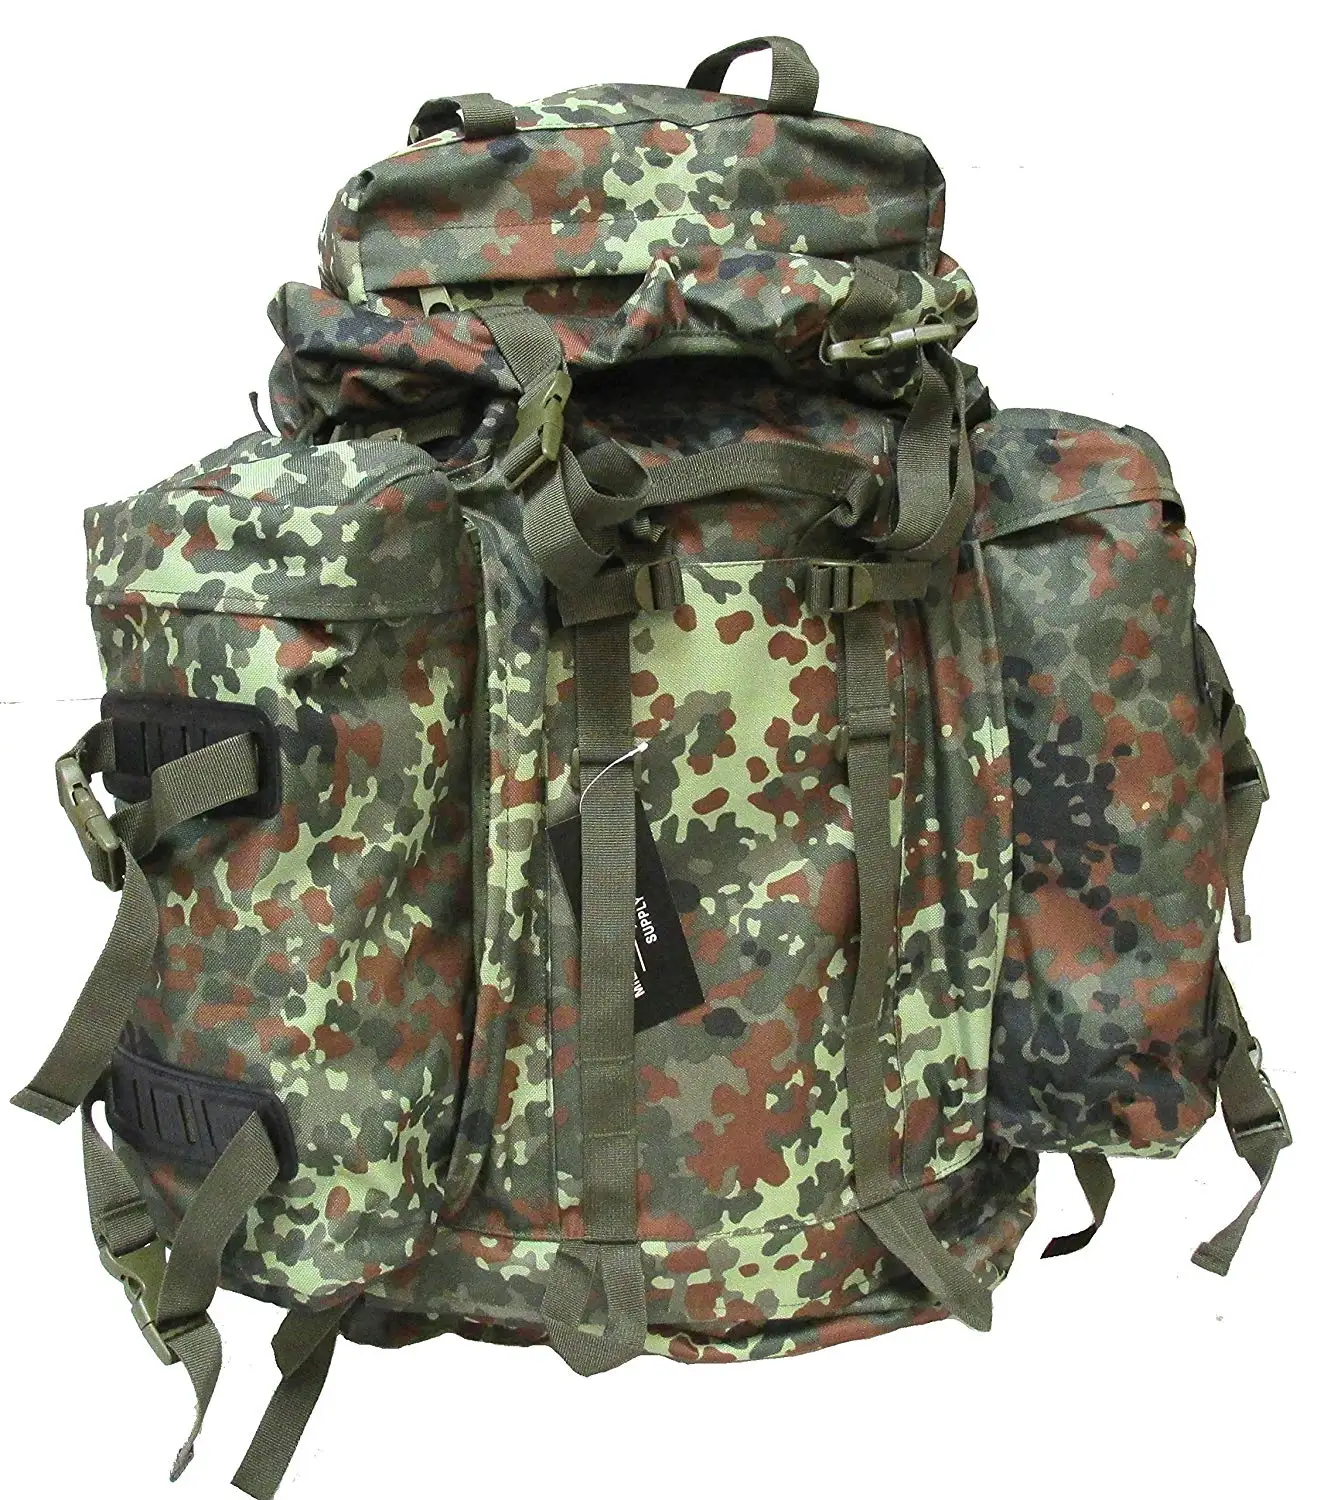 MFH BW ARMY RUCKSACK TACTICAL MOLLE HUNTING PACK LARGE 65L BACKPACK HDT CAMO FG